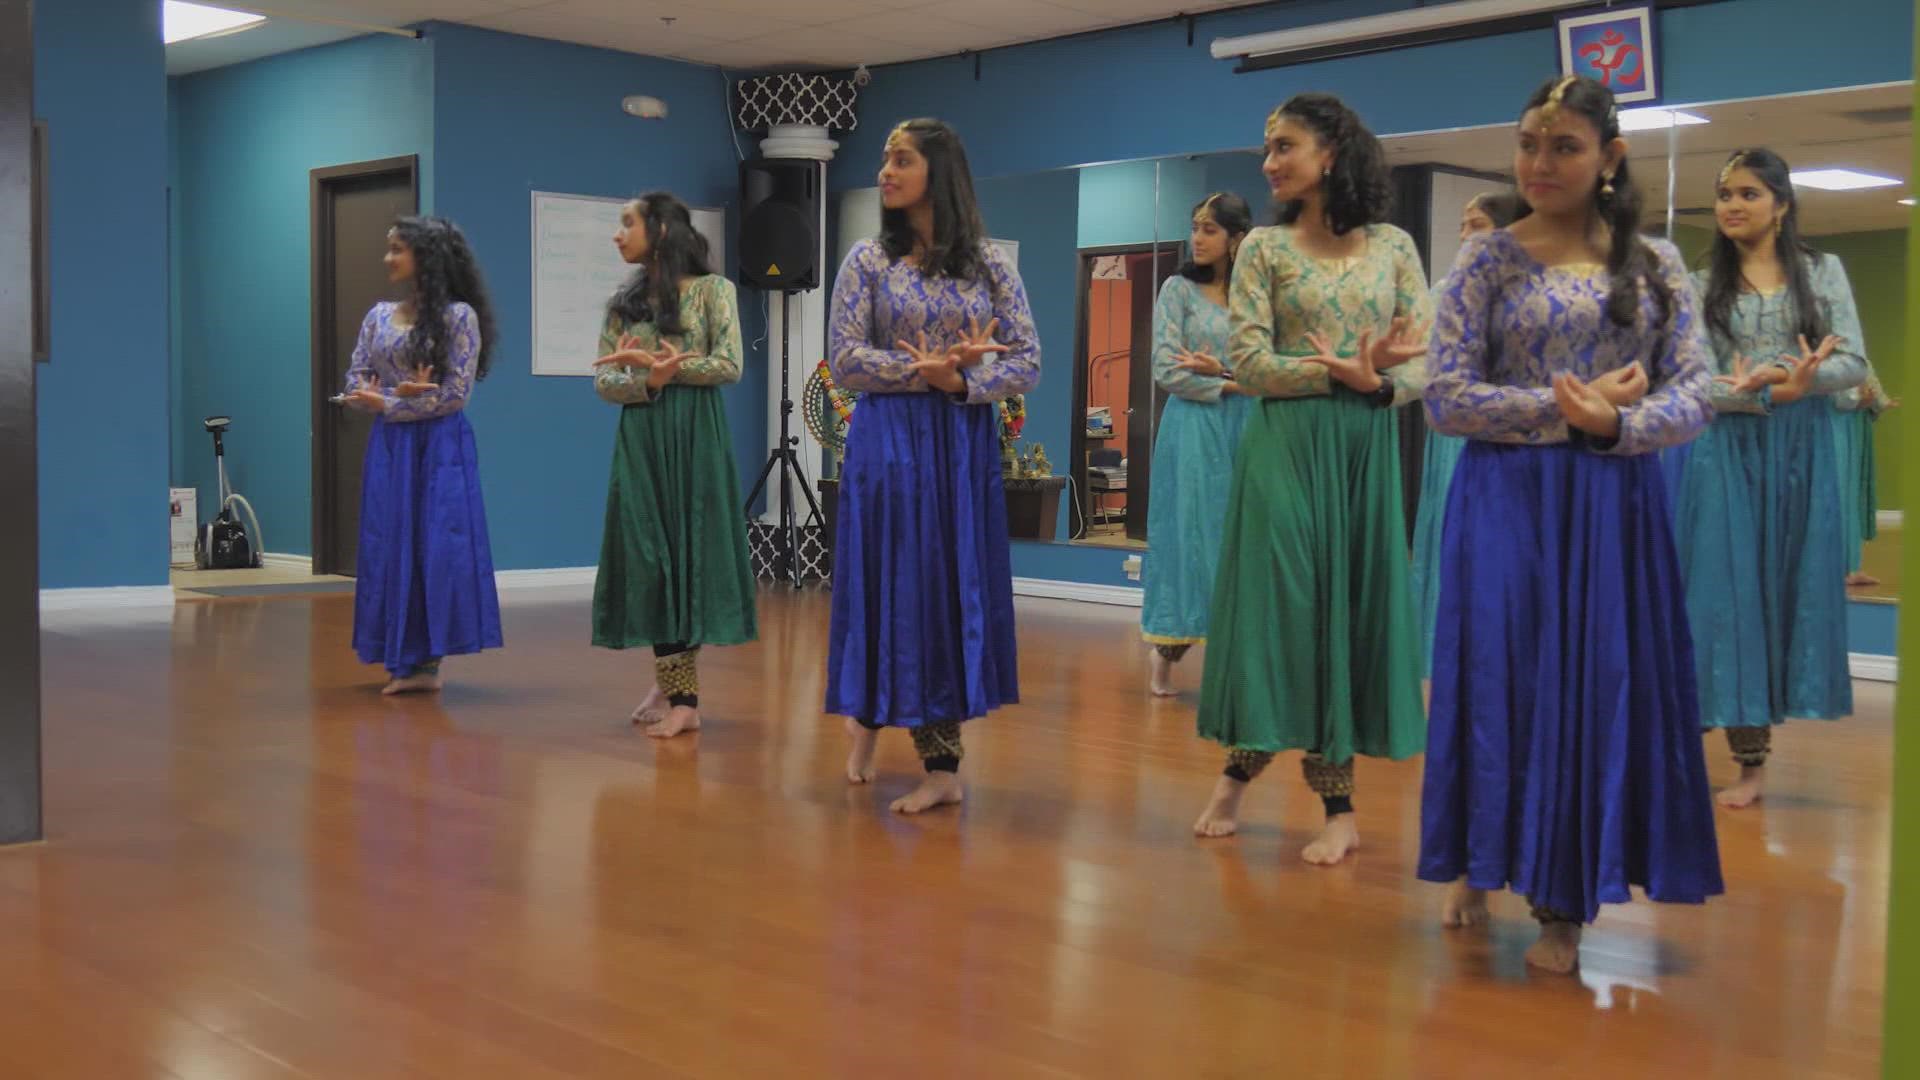 One Plano dance studio is helping North Texas women connect back to their roots in India.